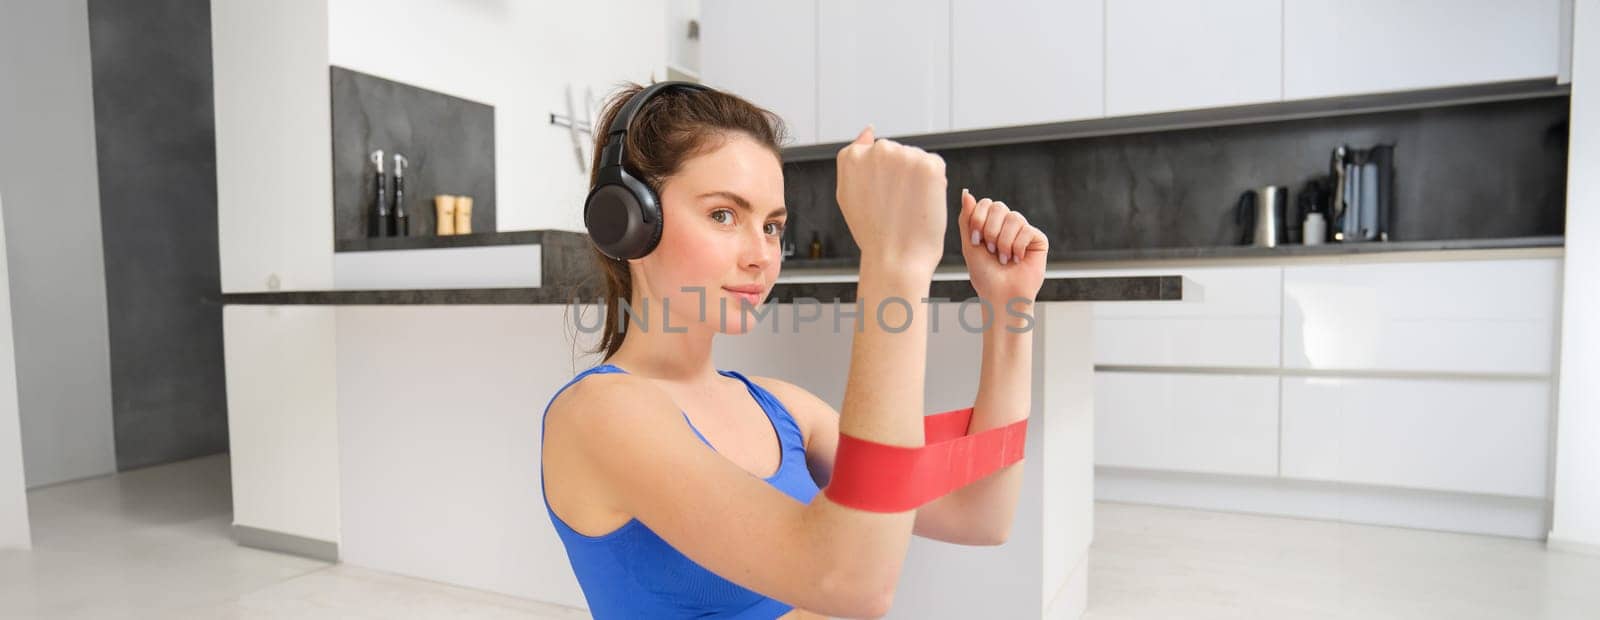 Young woman doing fitness workout at home, using elastic resistance band on arms, muscle exercises, sitting on rubber mat in living room.